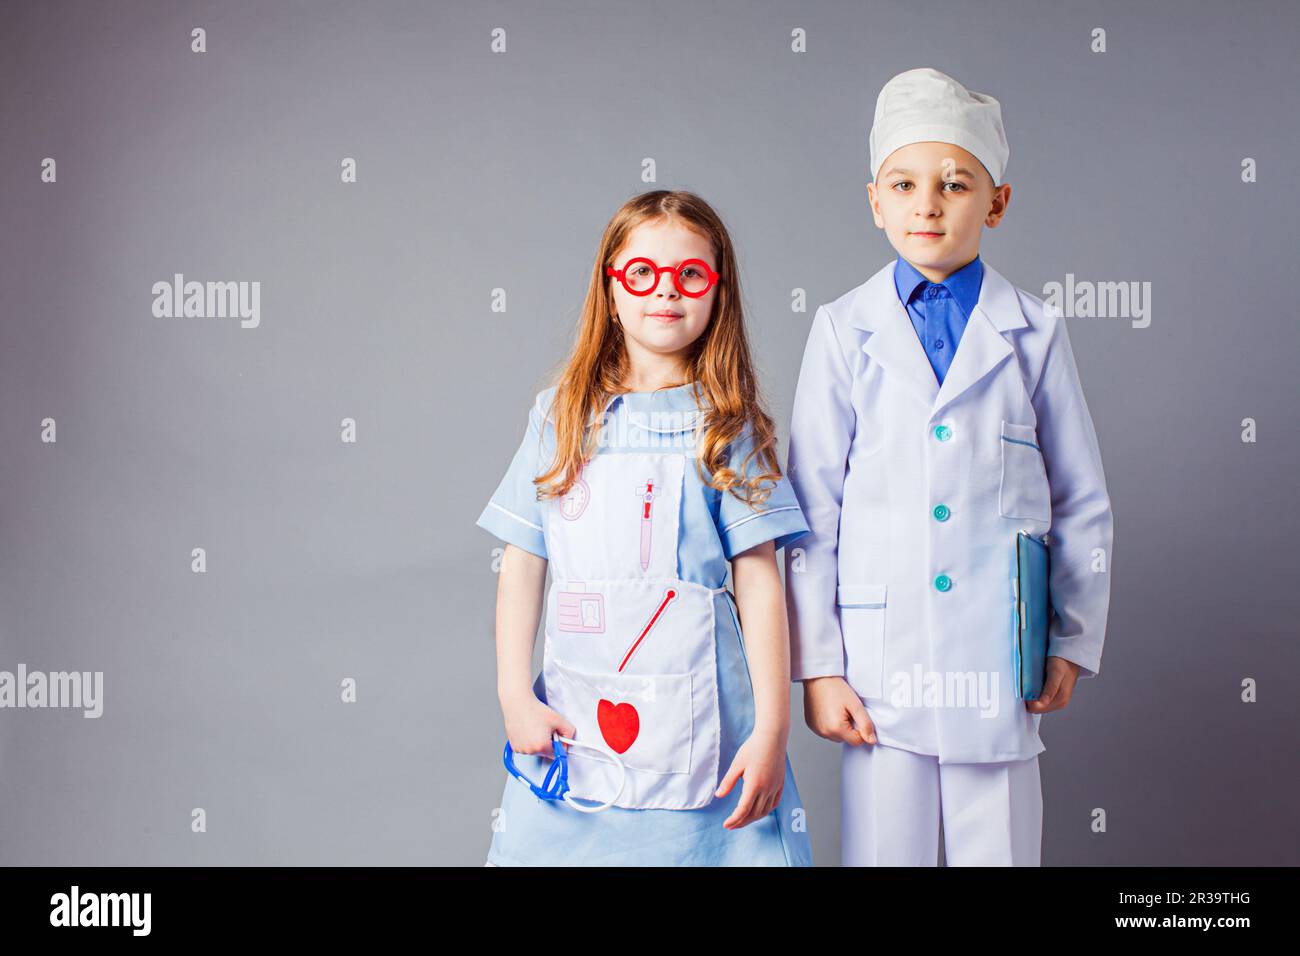 Cute boy and girl in medical uniform playing like doctors. Stock Photo